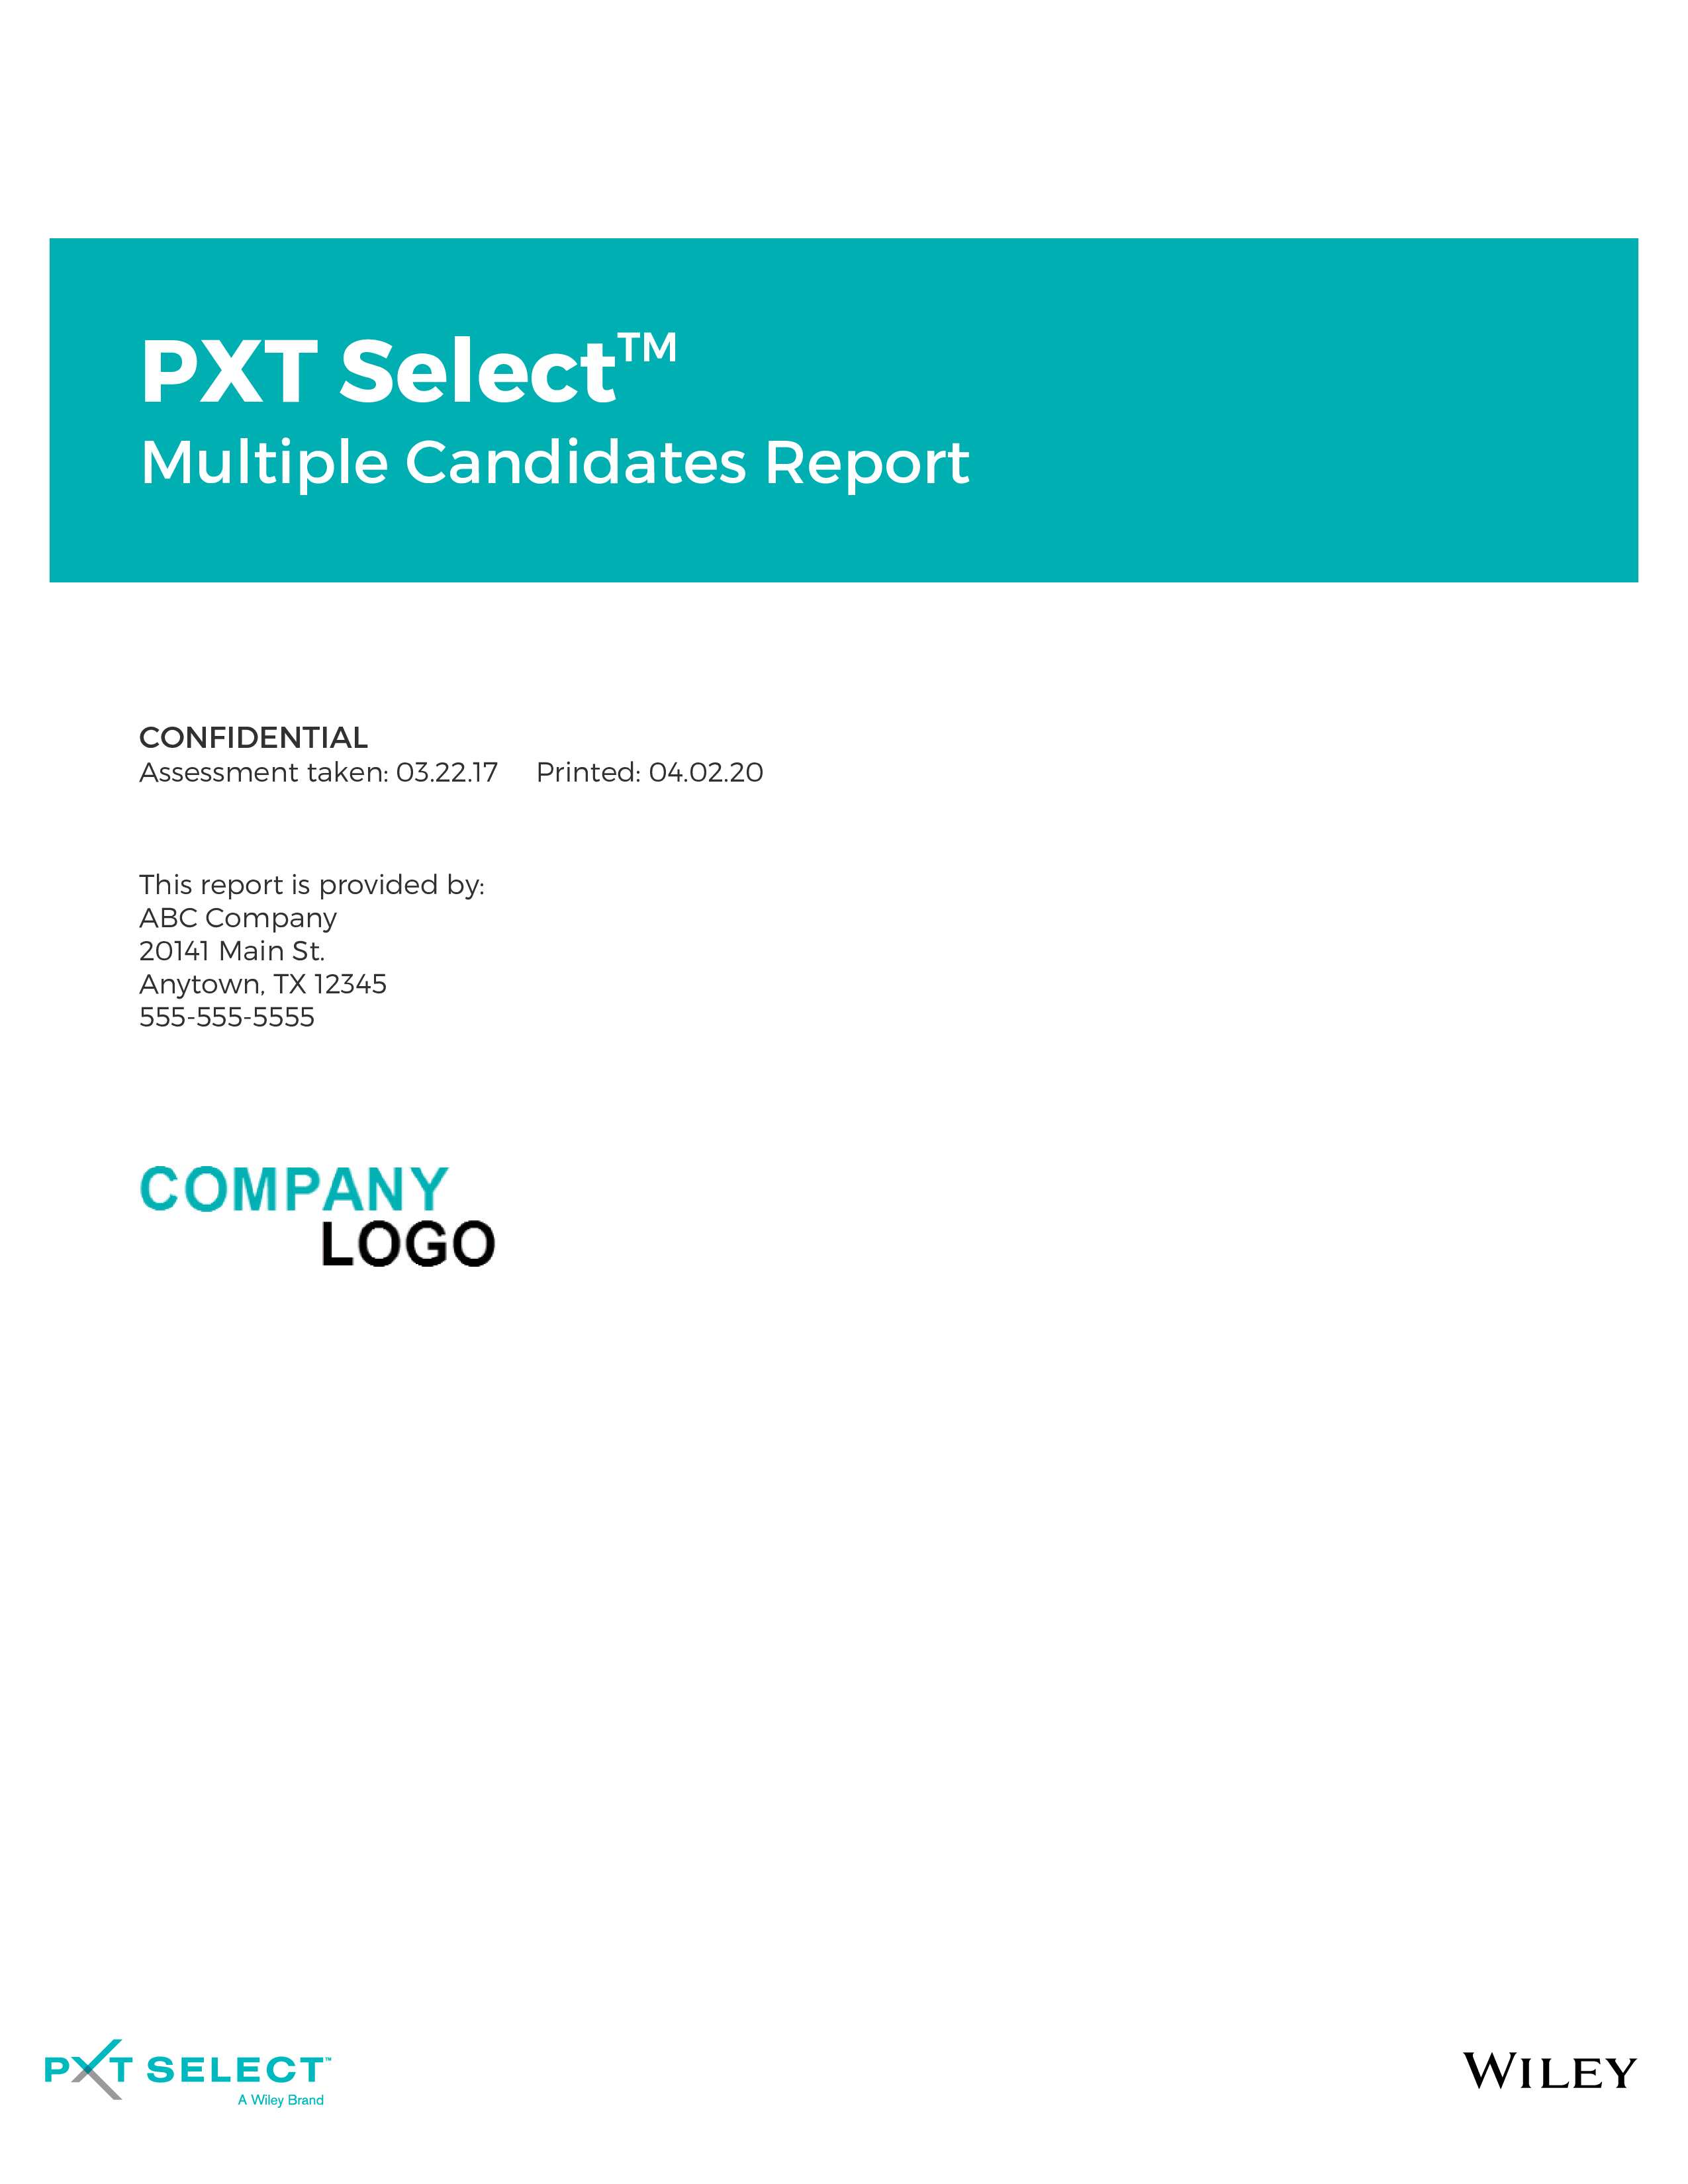 PXT Select Multiple Candidates Report November 2021 Image